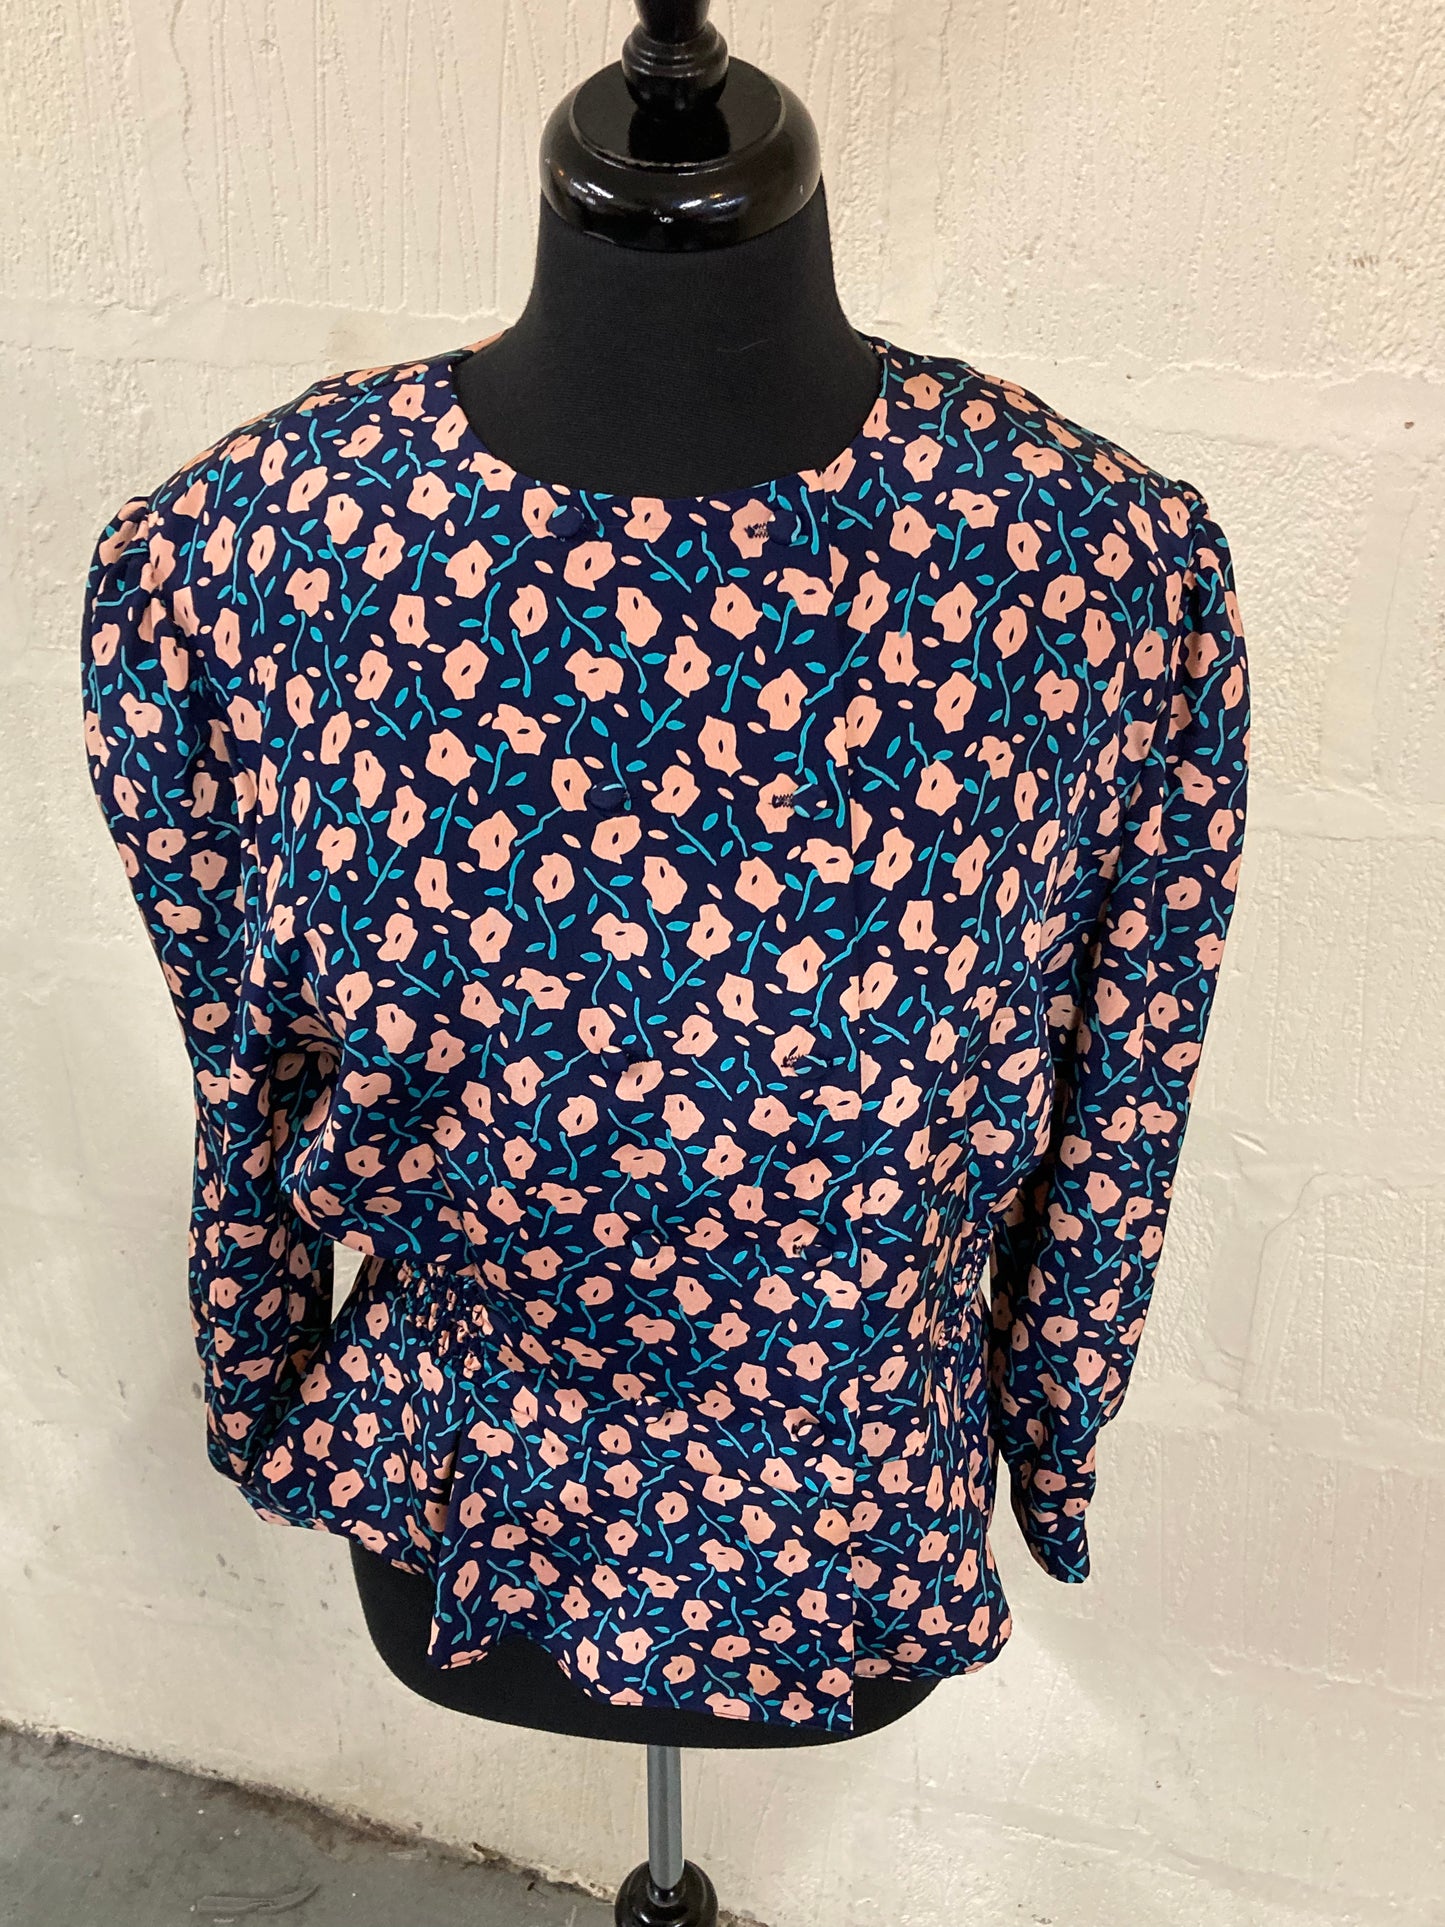 1980s Vintage Berkertex Navy with Pink and Turquoise Floral Top Size 16